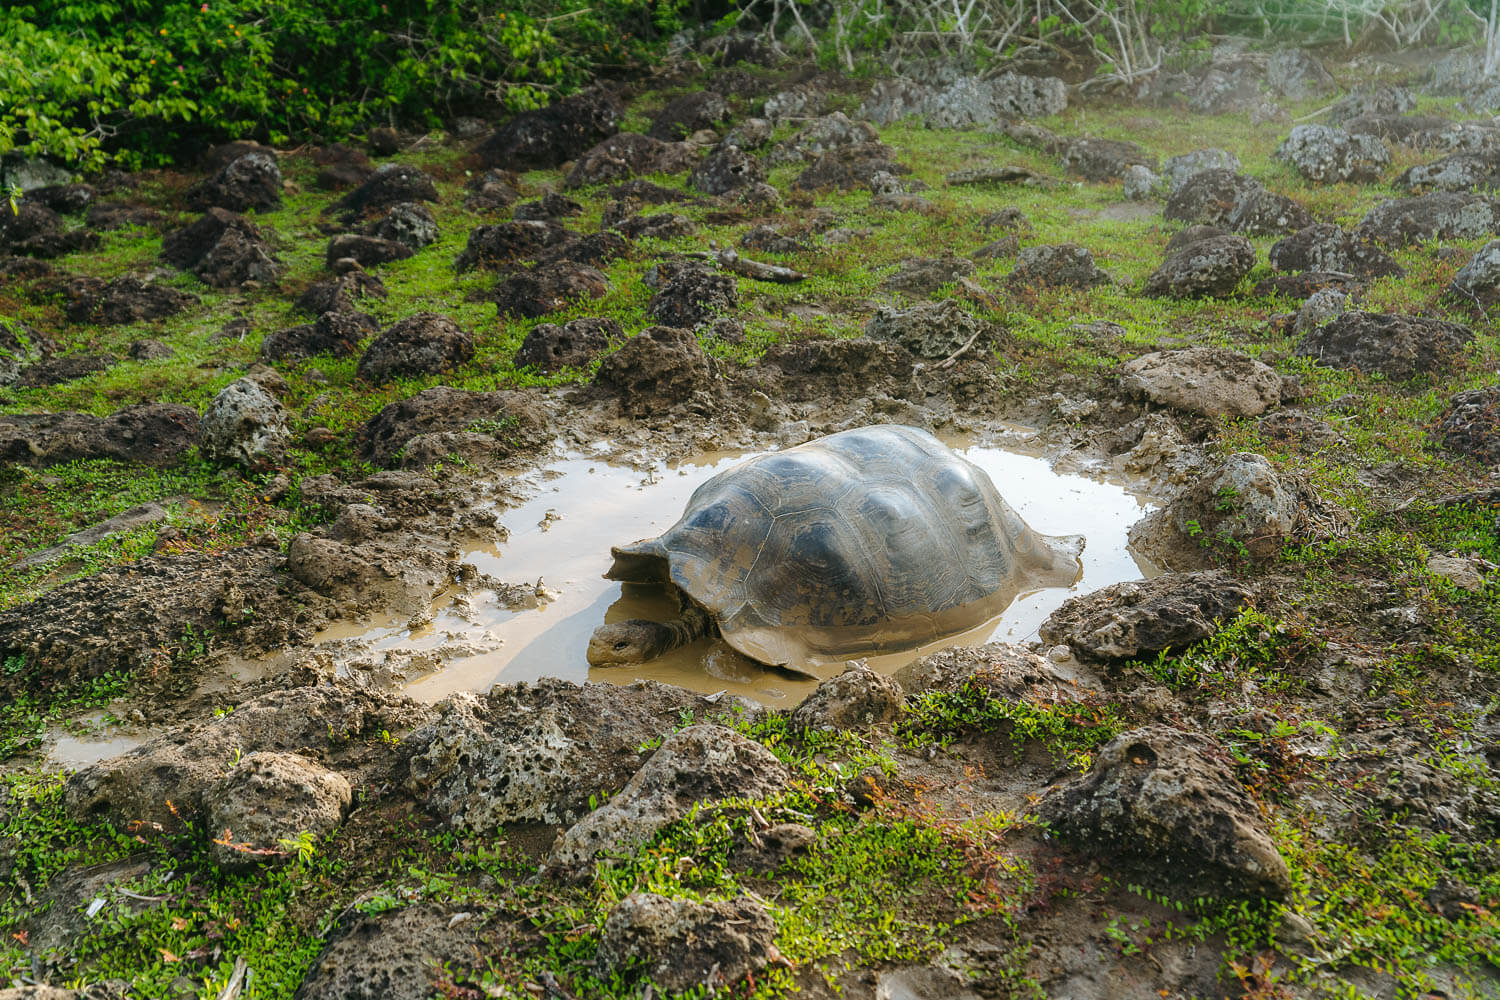 A giant tortoise in "La Galapaguera", part of the Highlands Tour